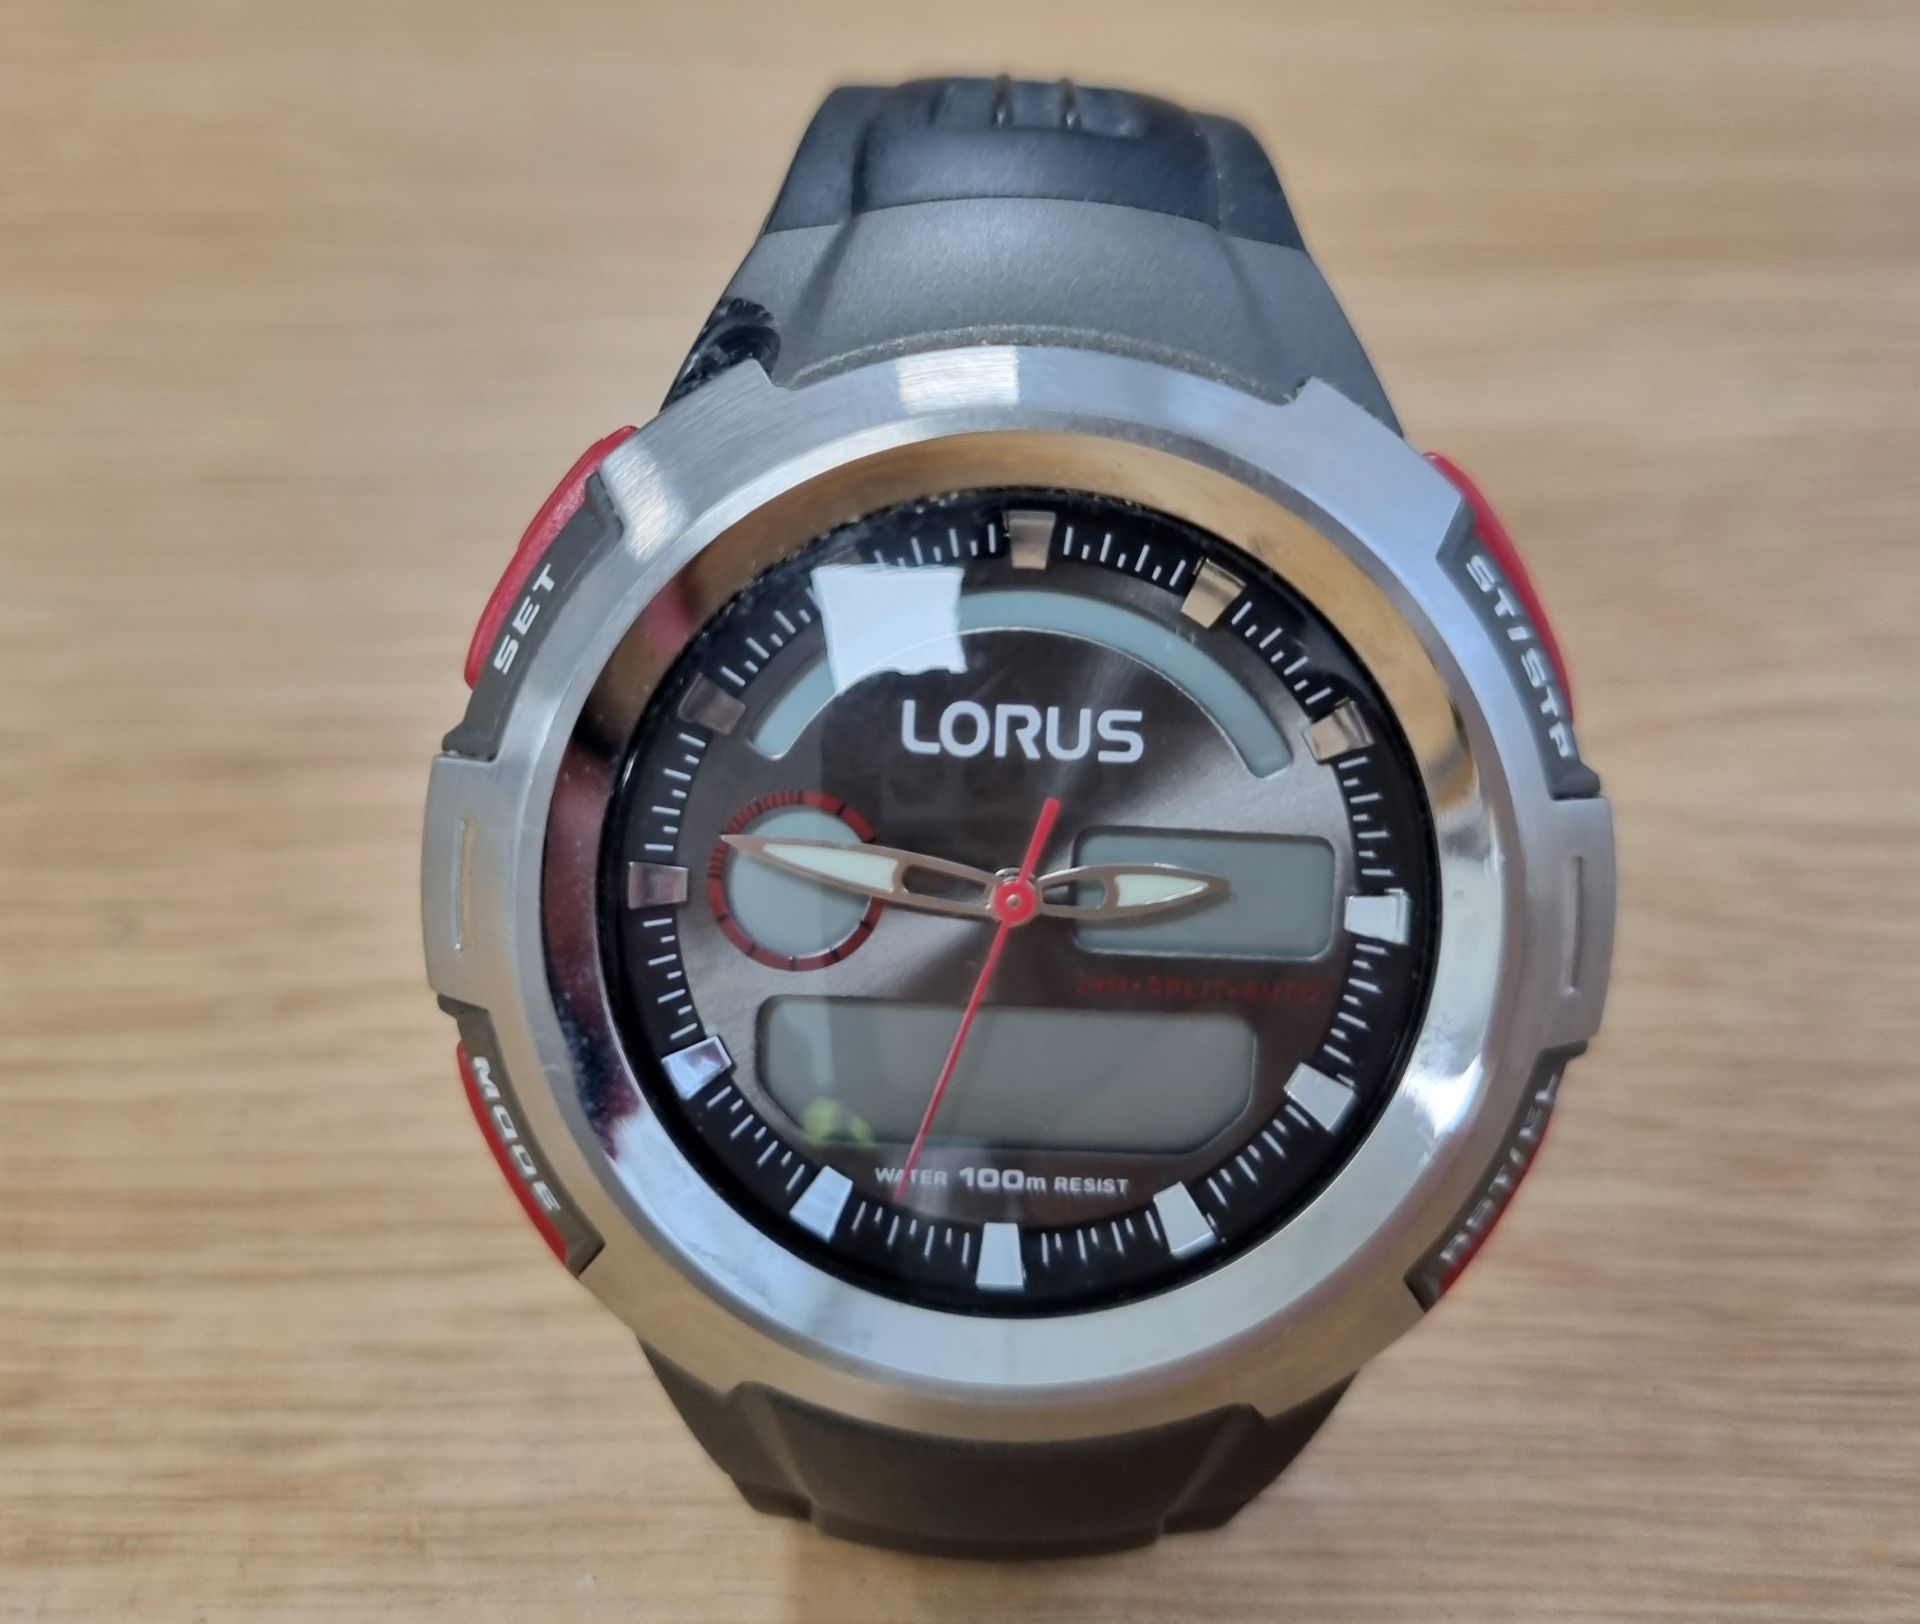 Lorus Z012-X001 mens dual display chronograph watch with resin strap - Image 2 of 4